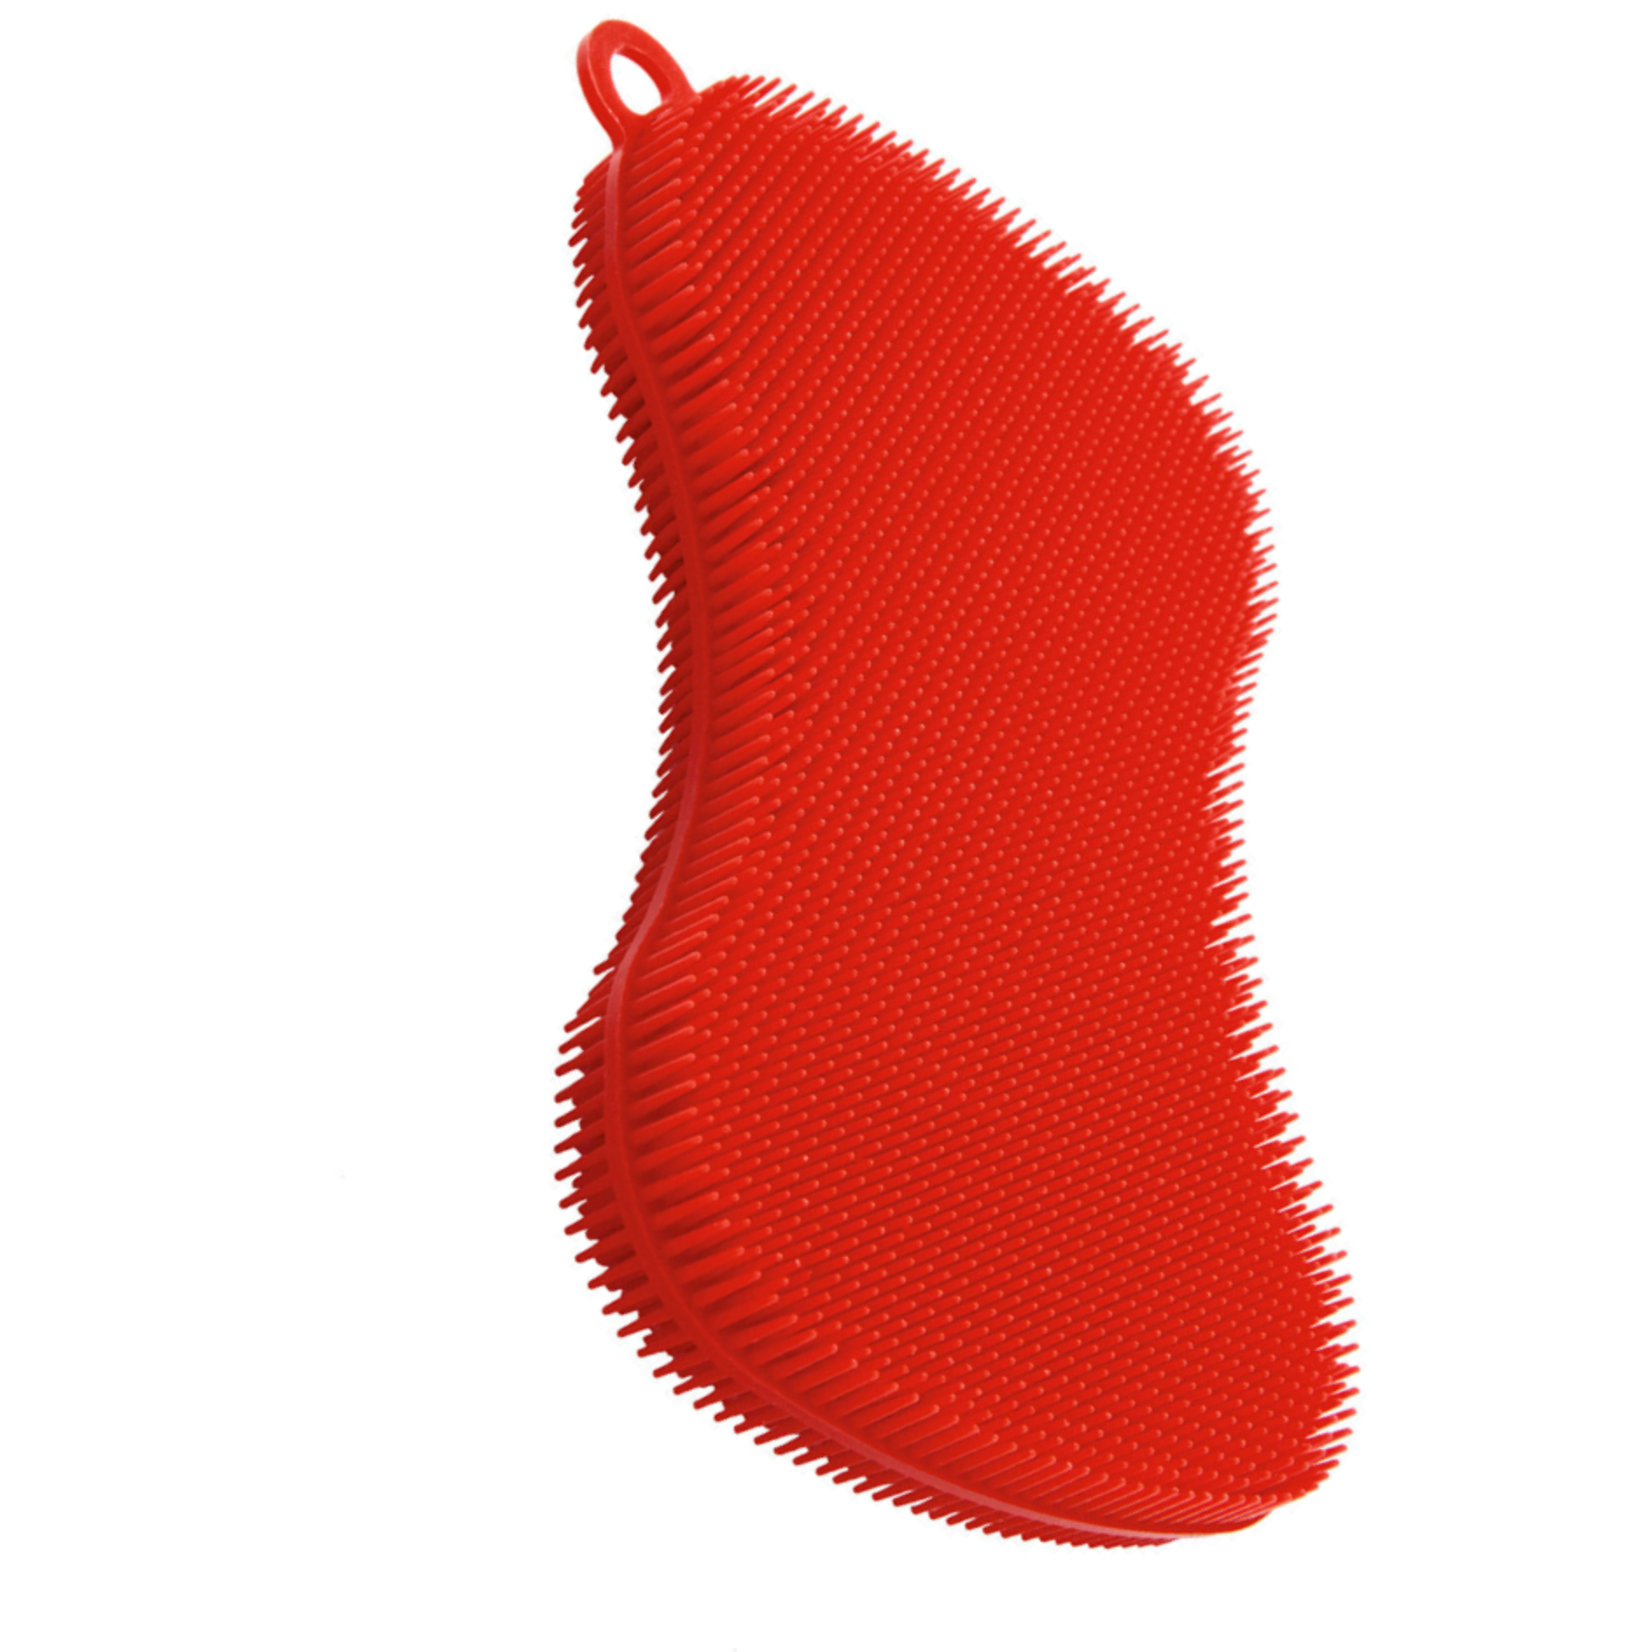 Kuhn Rikon Stay Clean Scrubber, red